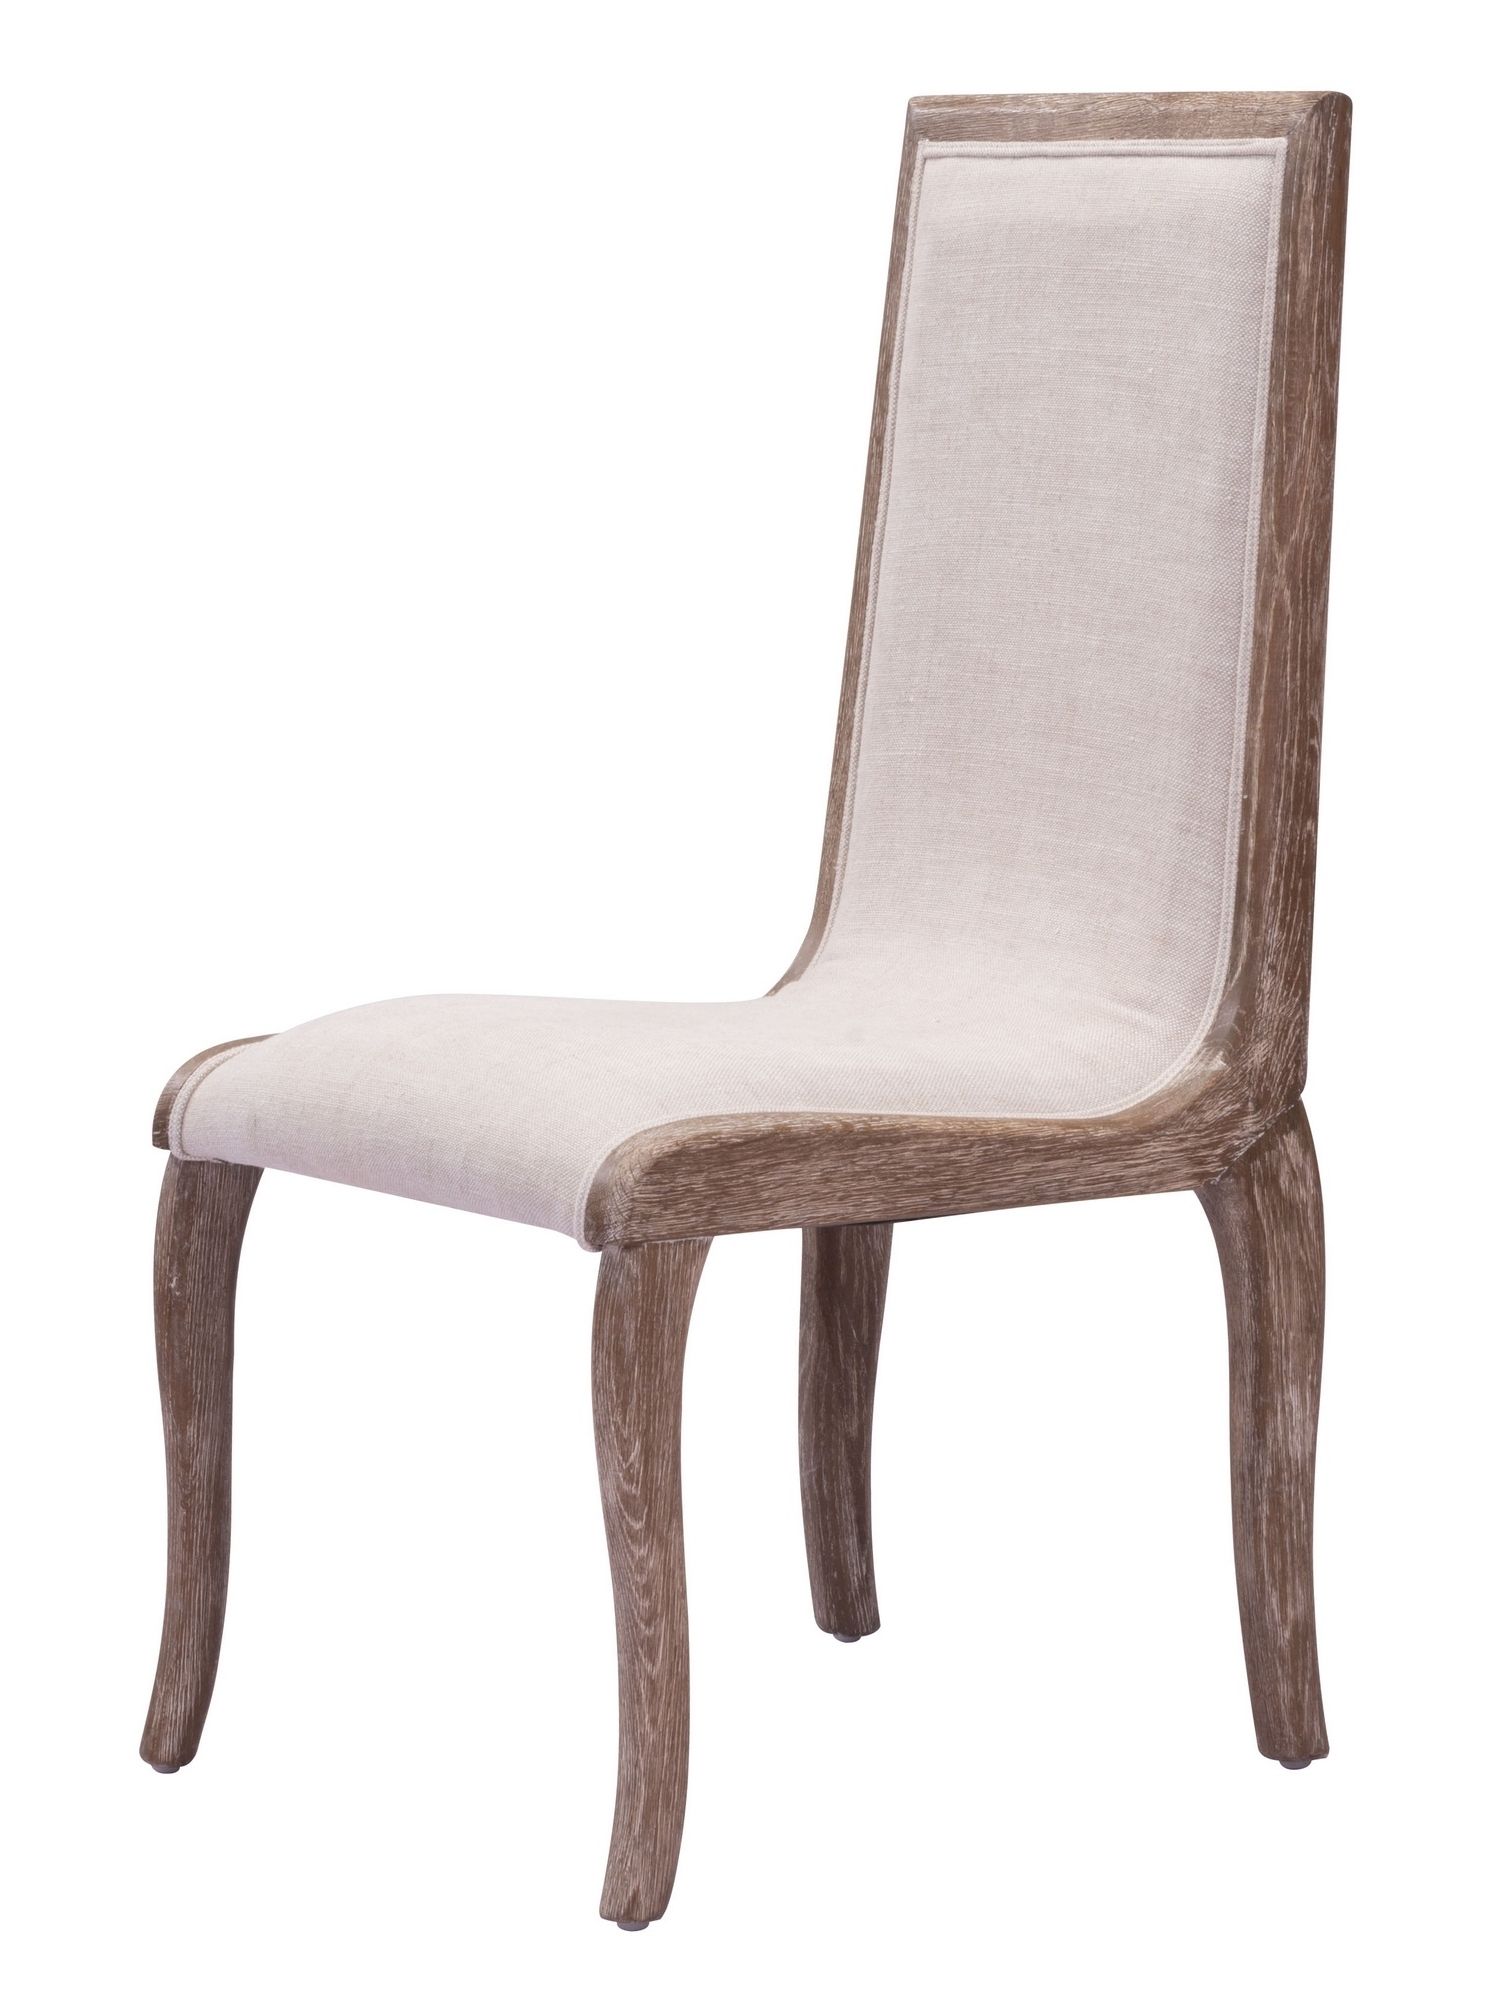 Scheler Shabby Chic Dining Chair Beige Intended For Most Recently Released Shabby Chic Dining Chairs (Photo 11 of 25)